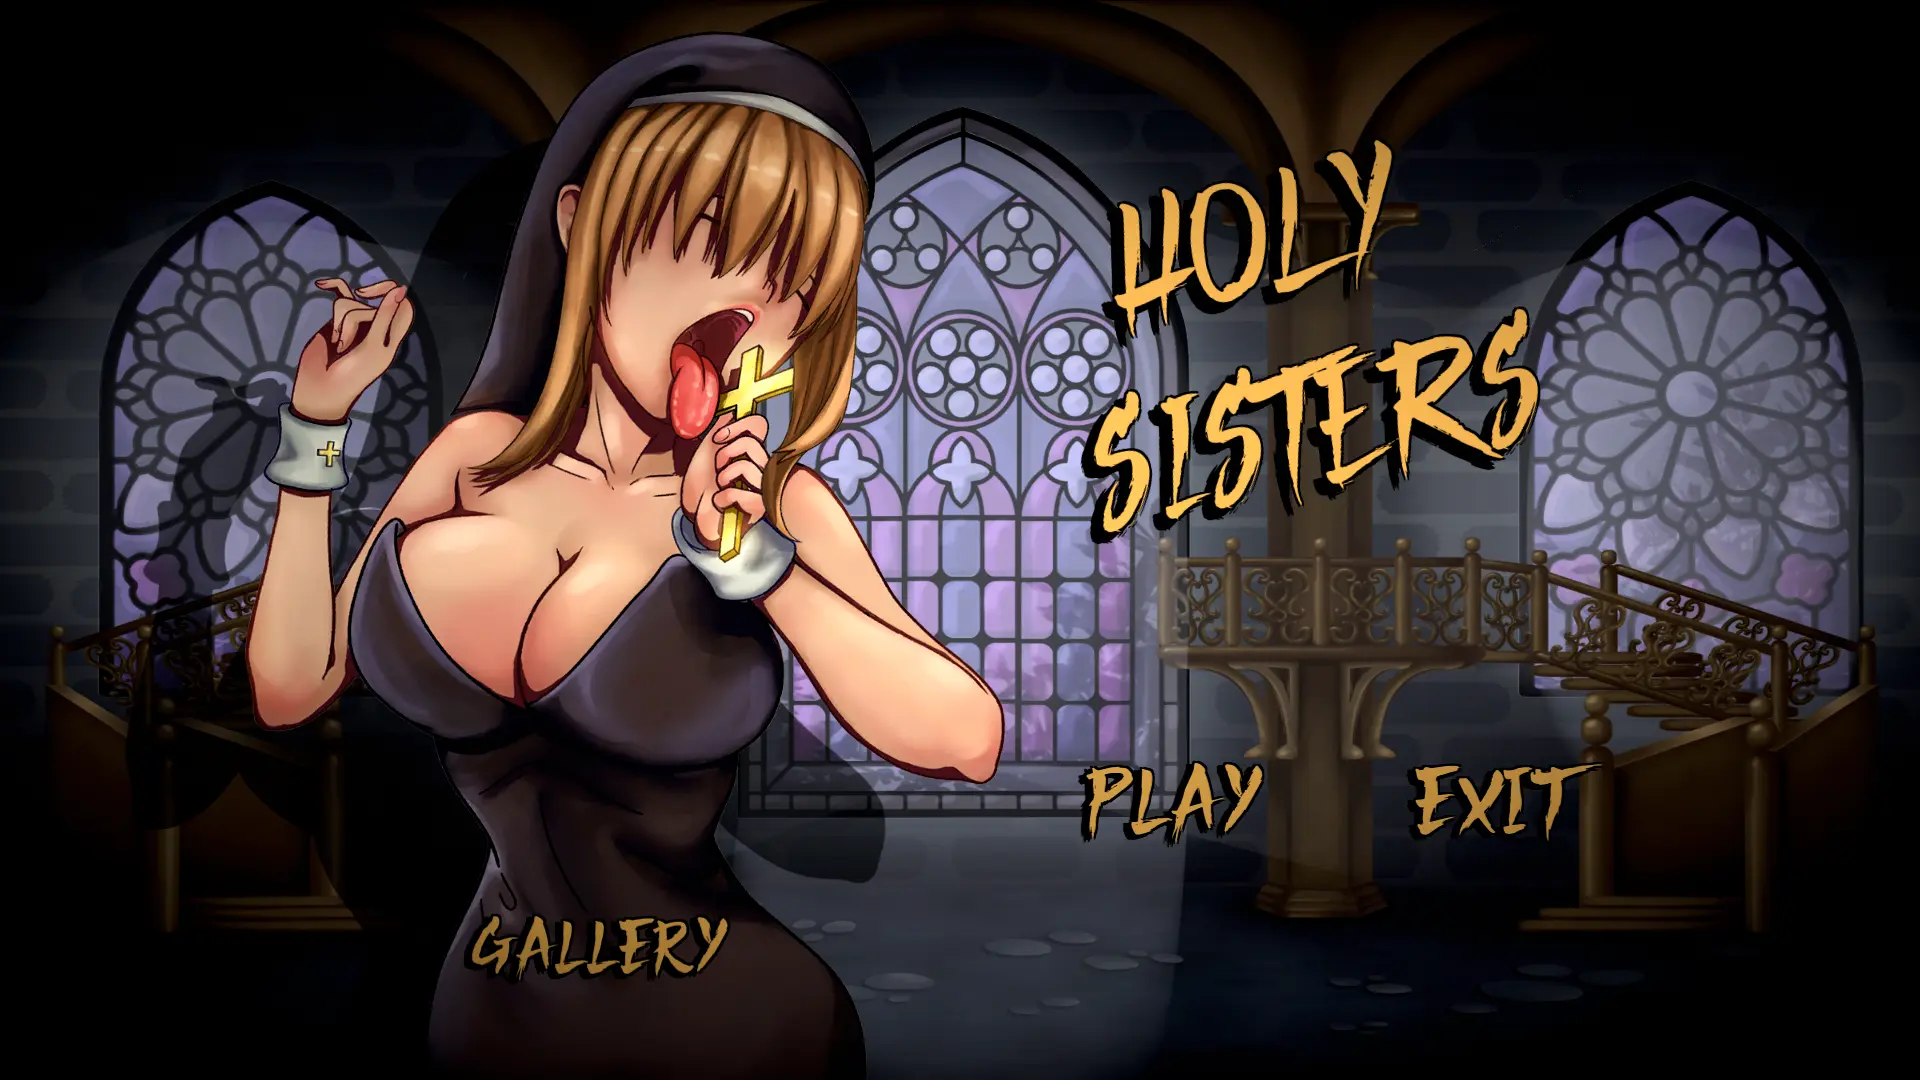 Holy Sisters + 3D main image